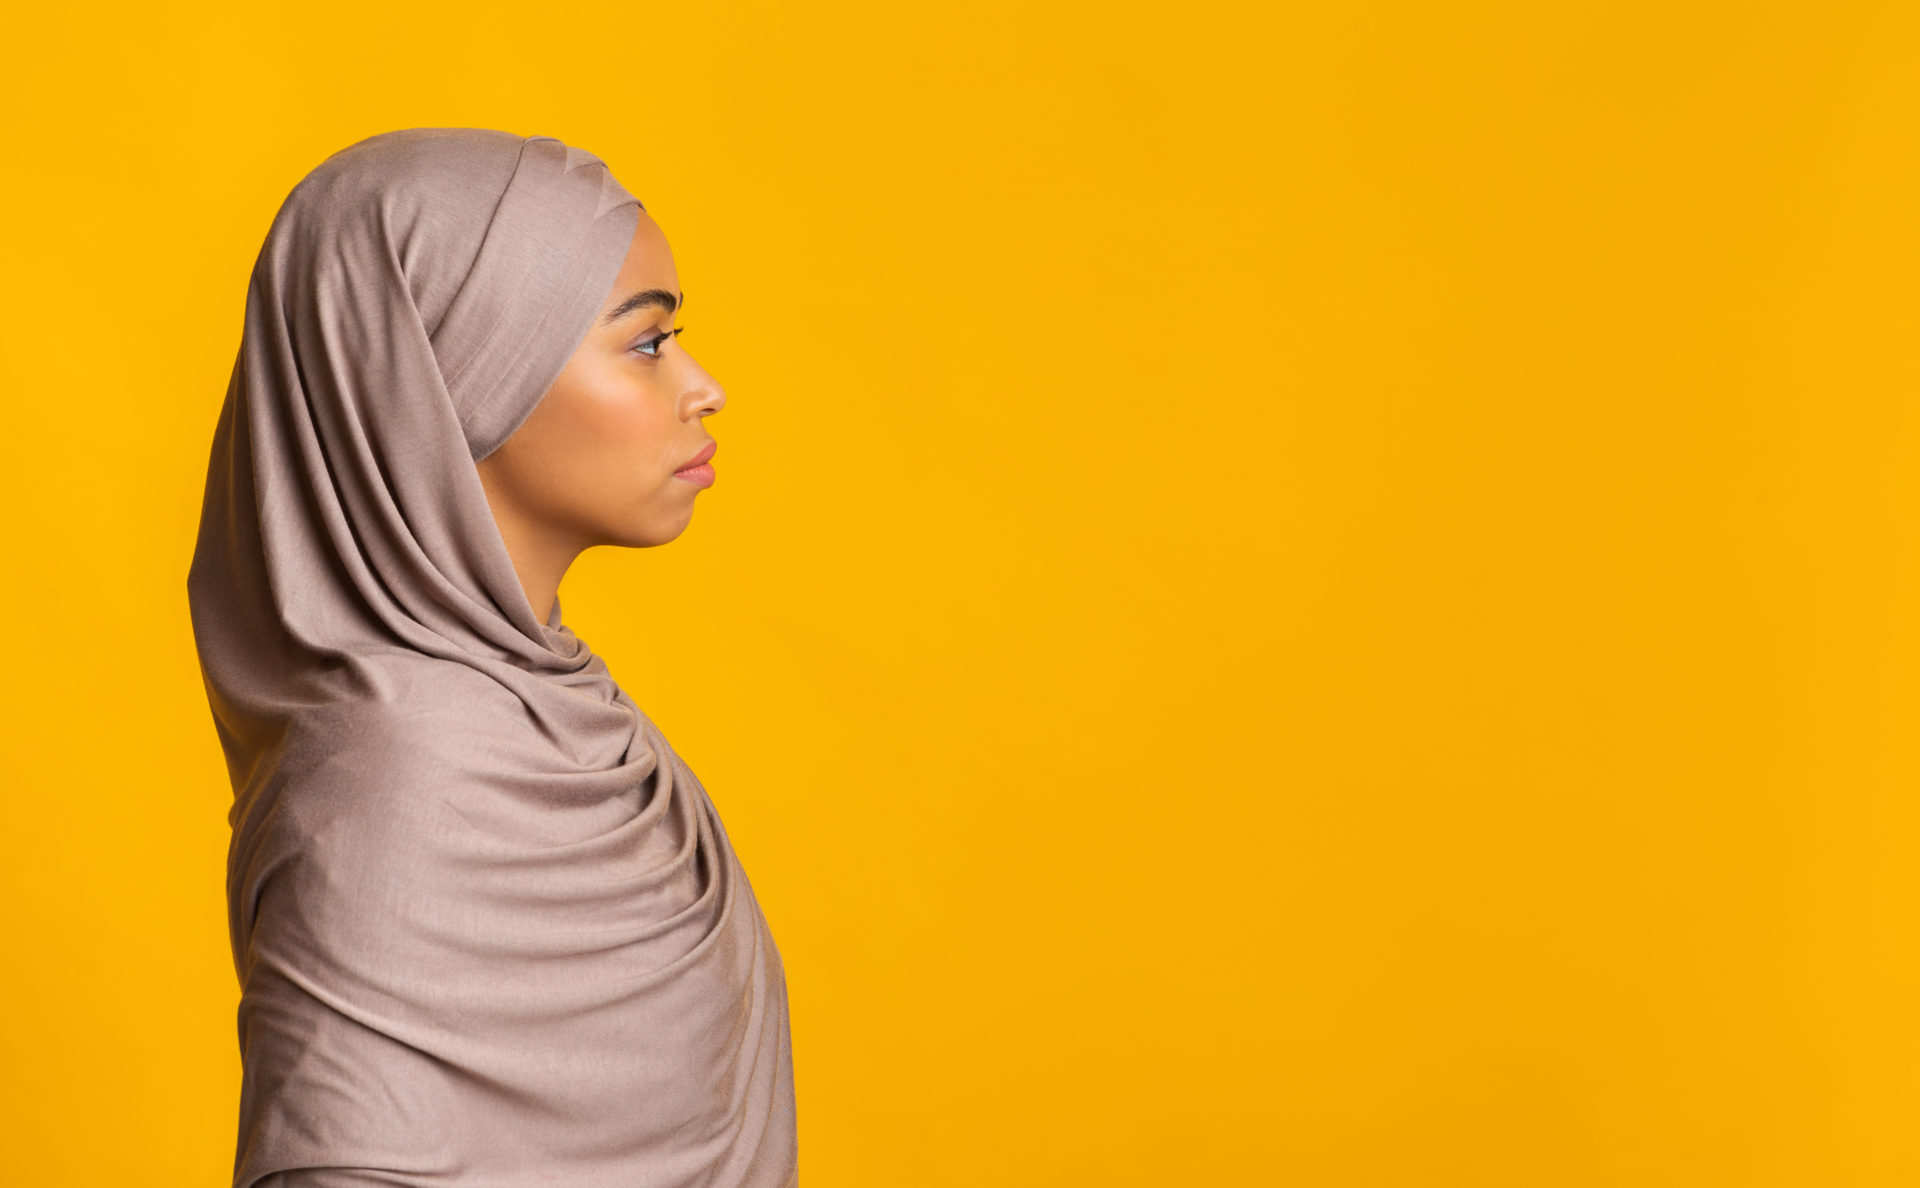 Oklahoma Women Say Wearing Hijabs Is An Empowering Choice